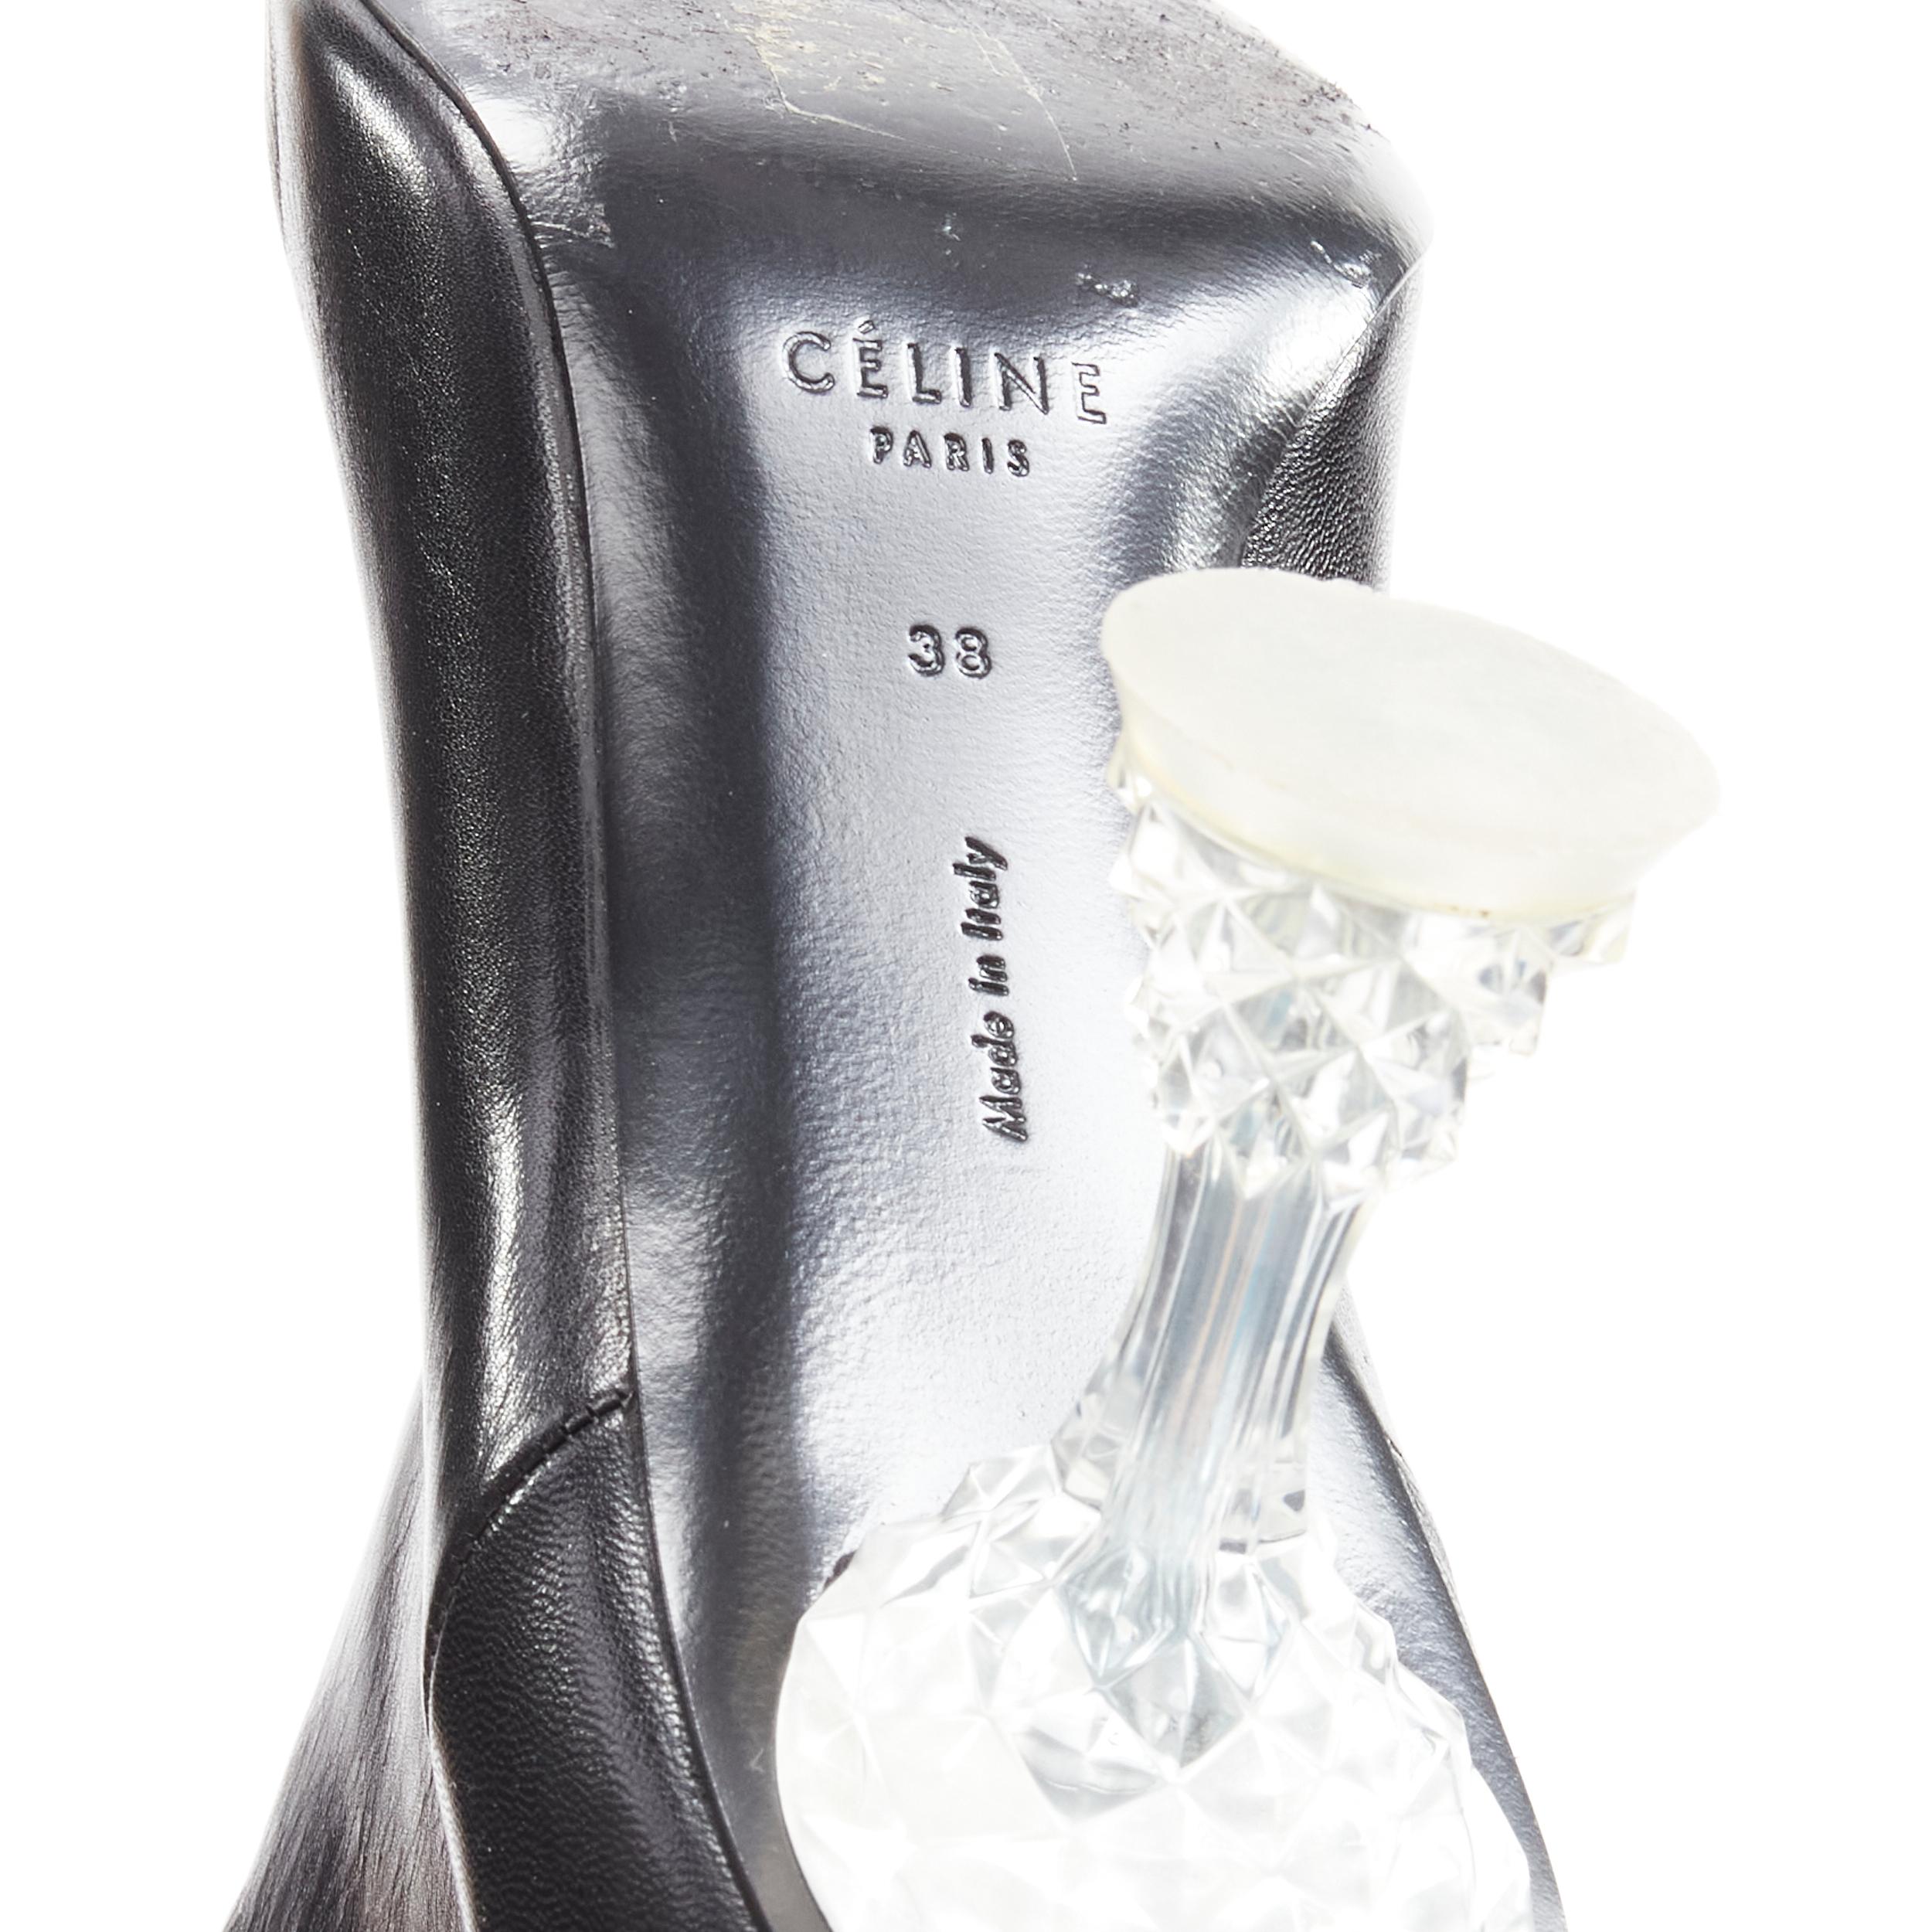 OLD CELINE Phoebe Philo 2018 clear crystal lucite heel leather ankle boots EU38 4